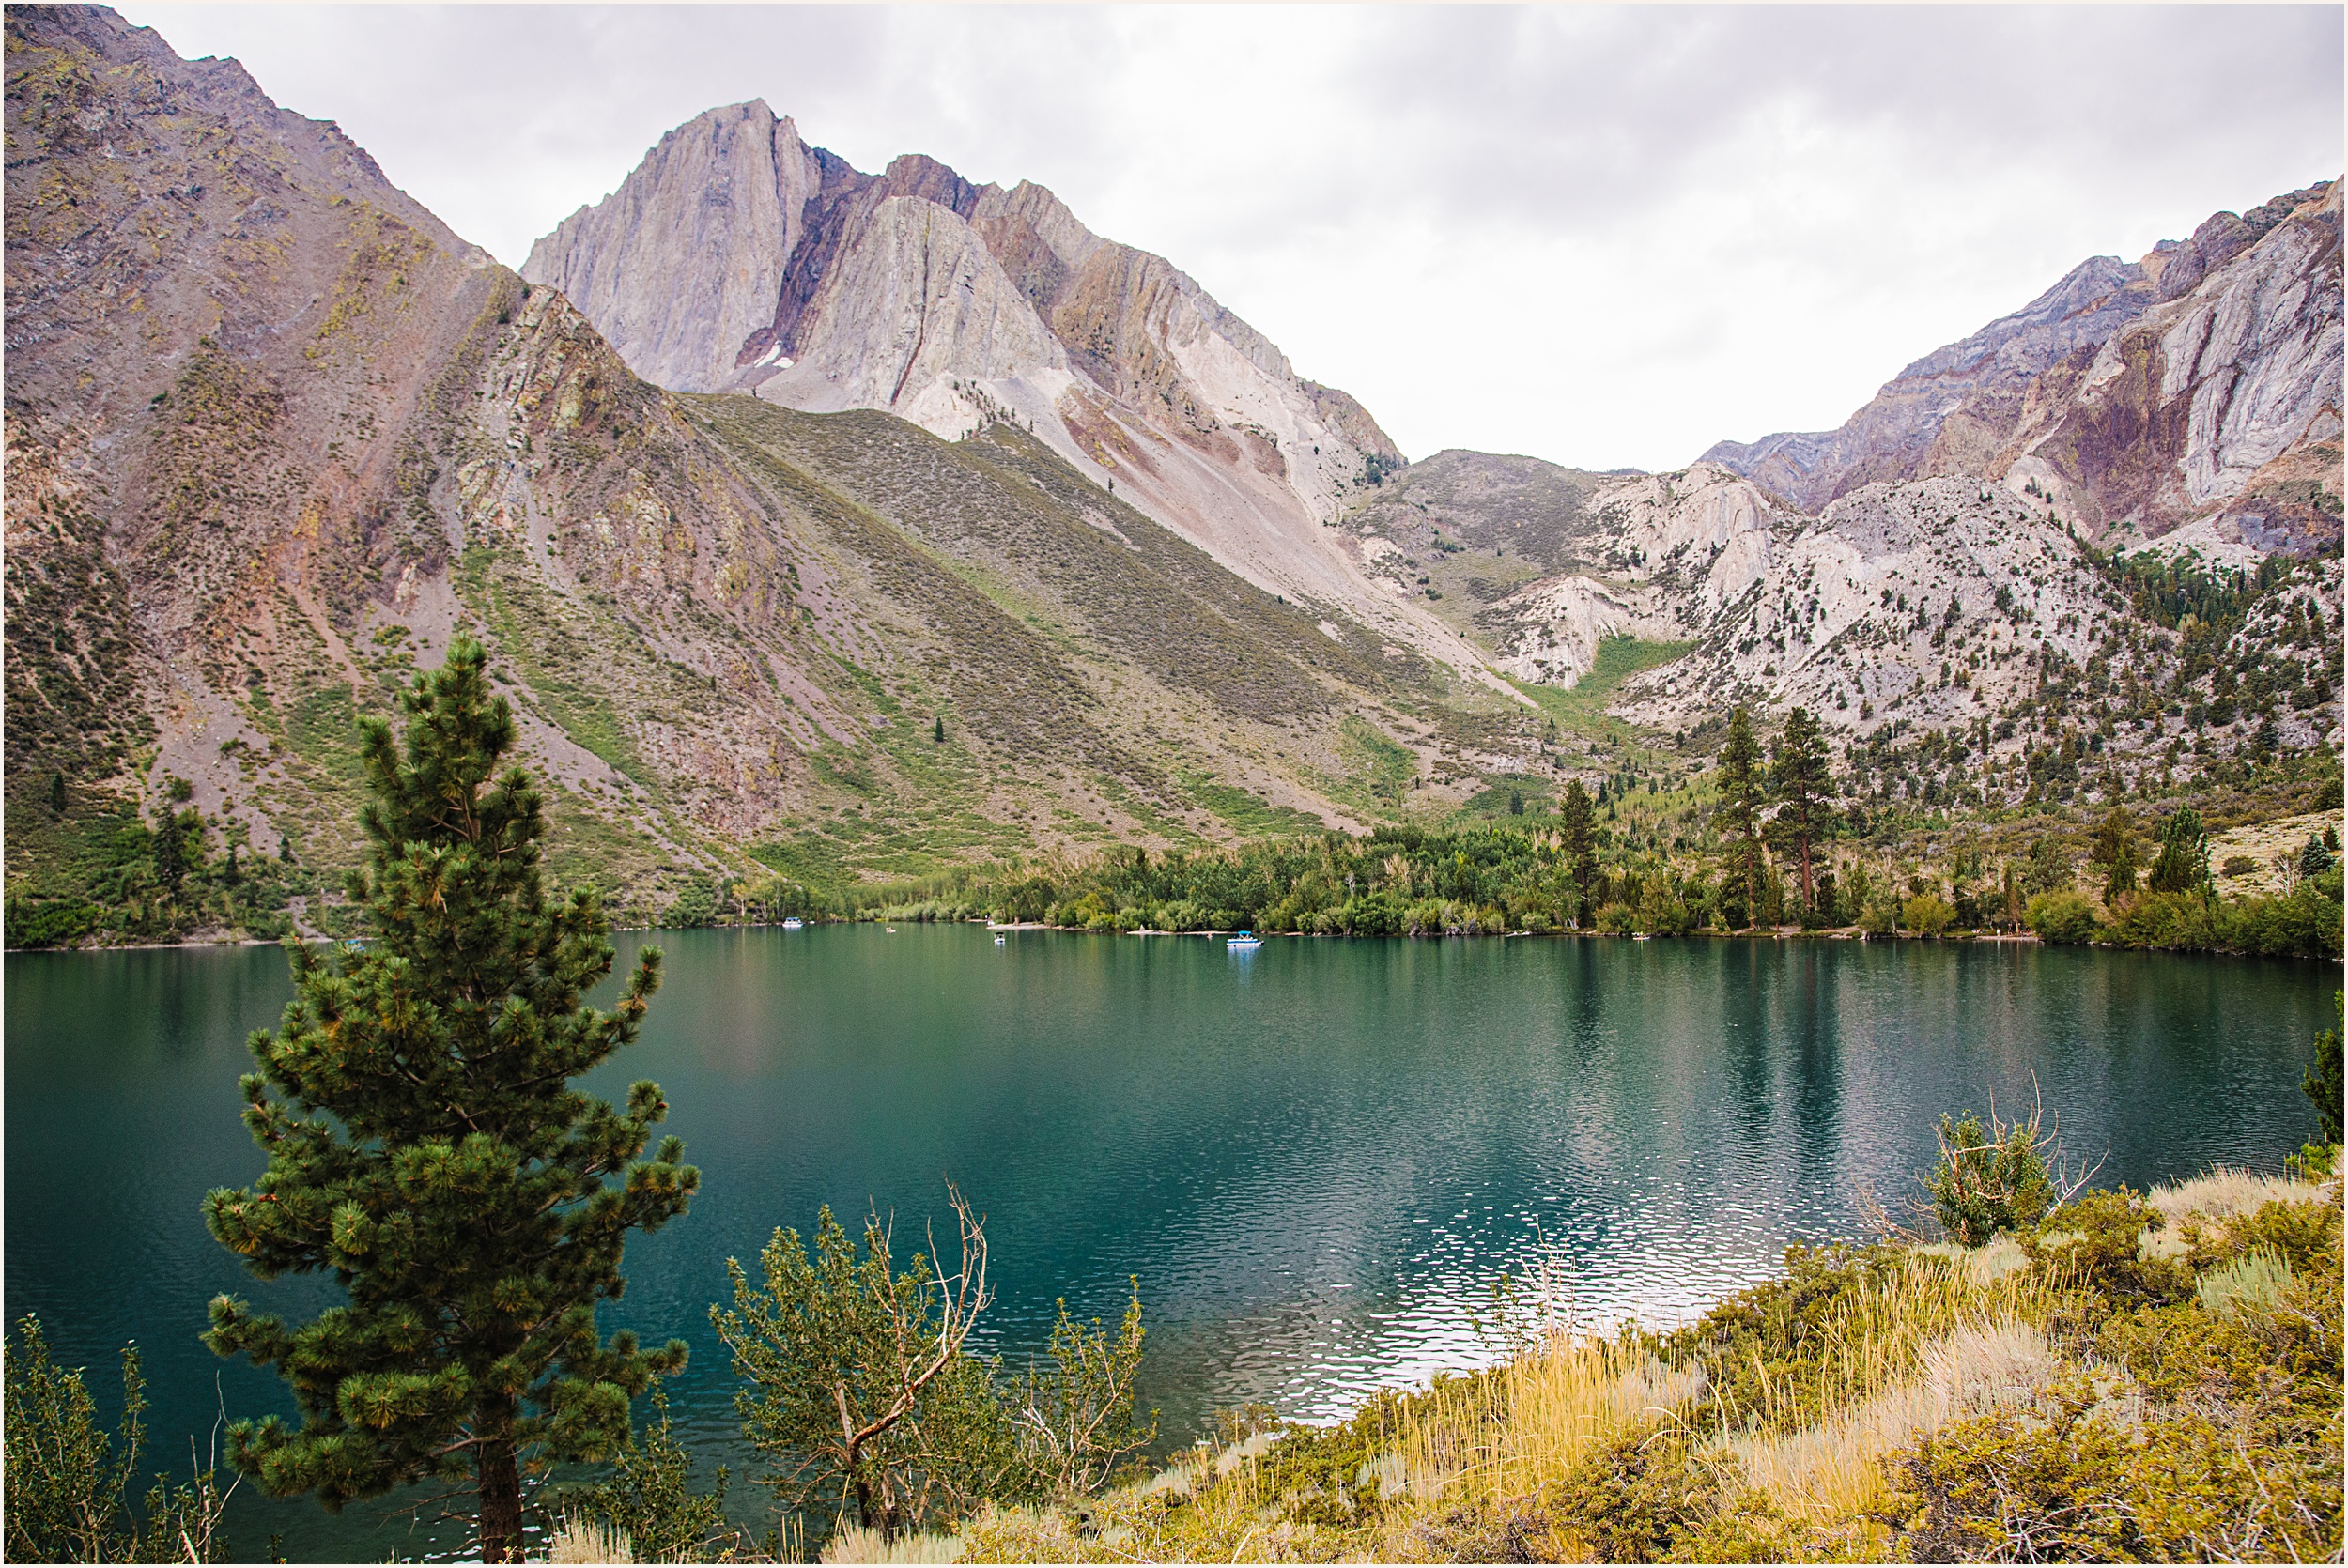 Eastern-Sierras-2022-4 How to have an Incredible Eastern Sierras and Mammoth Lake Elopement